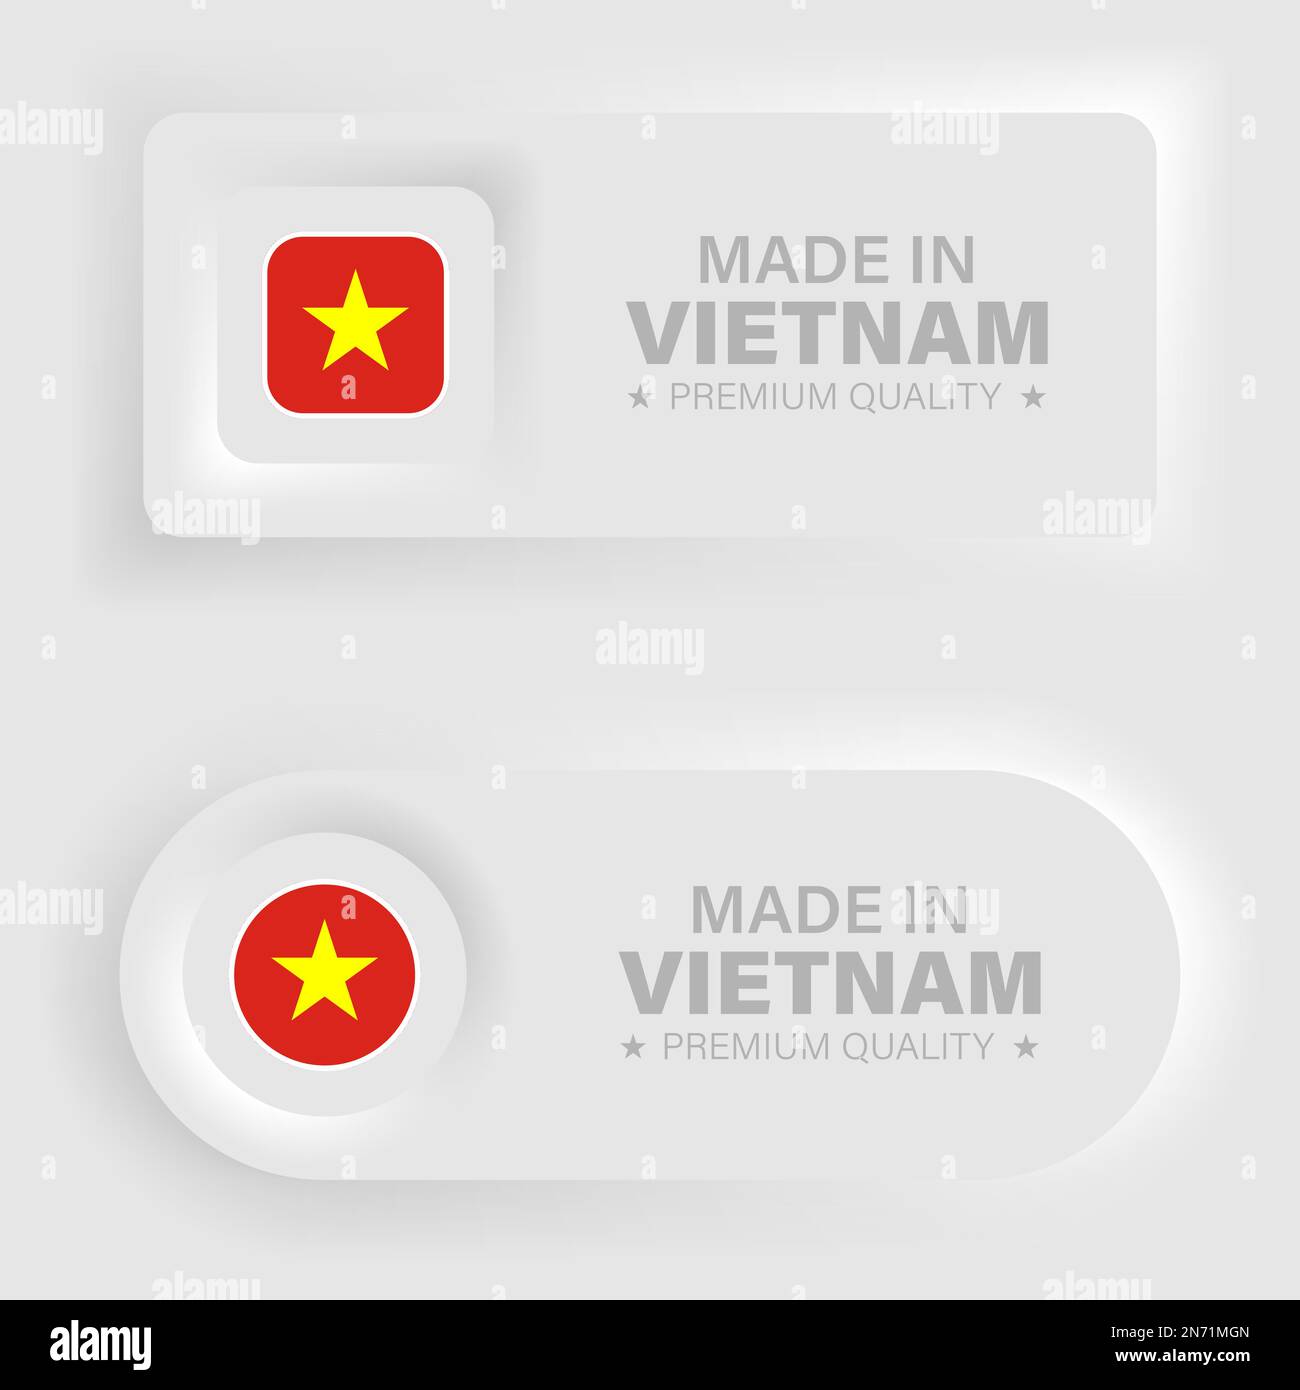 Made in Vietnam neumorphic graphic and label. Element of impact for the use you want to make of it. Stock Vector